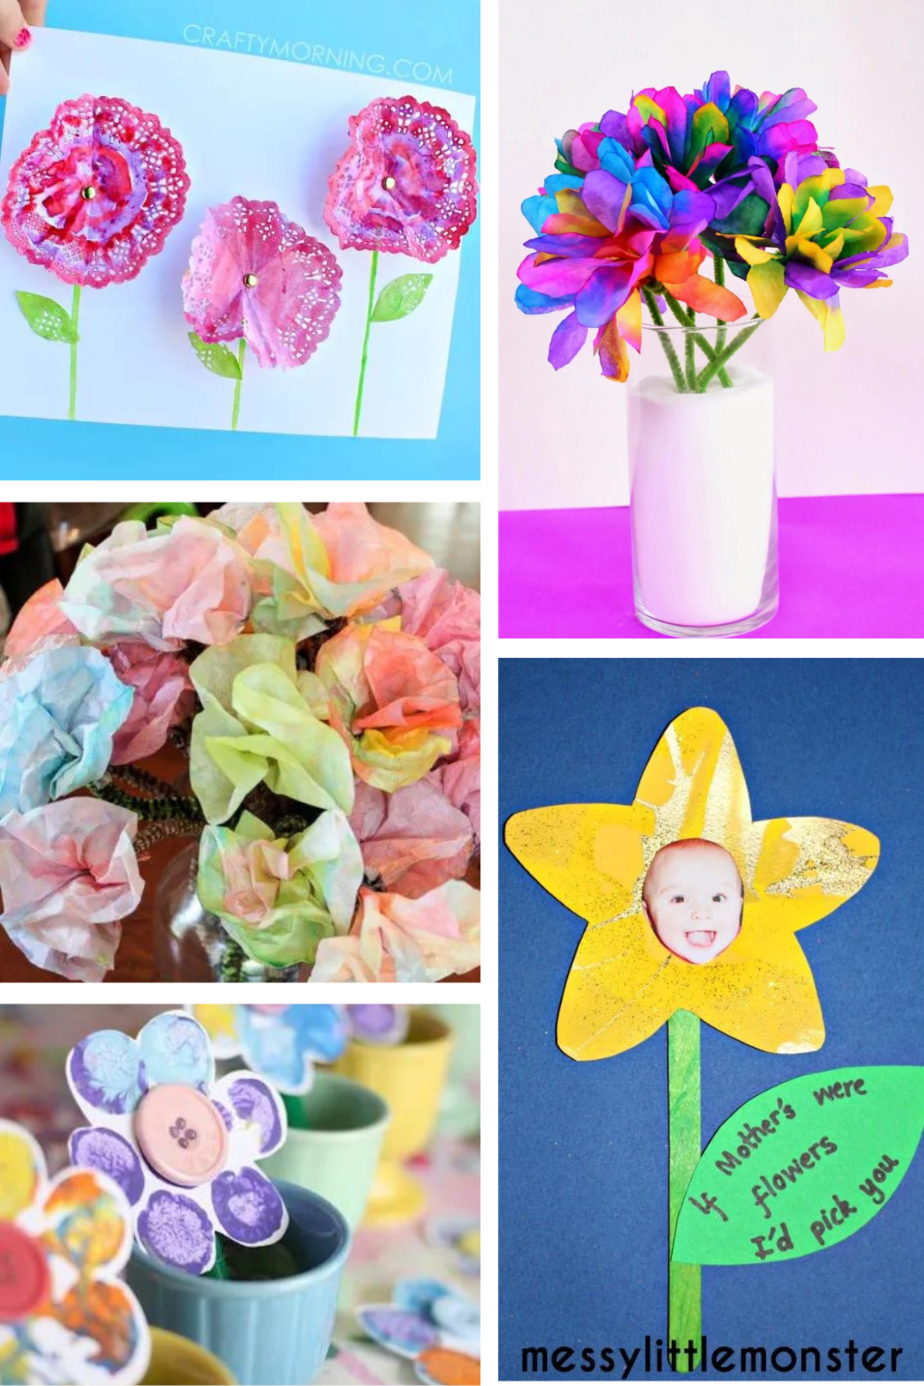 Spring has sprung and creativity is in full bloom! 🌸✨ Dive into our collection of 8 spring-tastic flower craft ideas perfect for your preschooler's playful spirit! From coffee filter petals to button bouquets, let's paint, glue, and sprinkle joy all around! 🎨💖 #SpringCrafts #PreschoolFun #CreativeKids